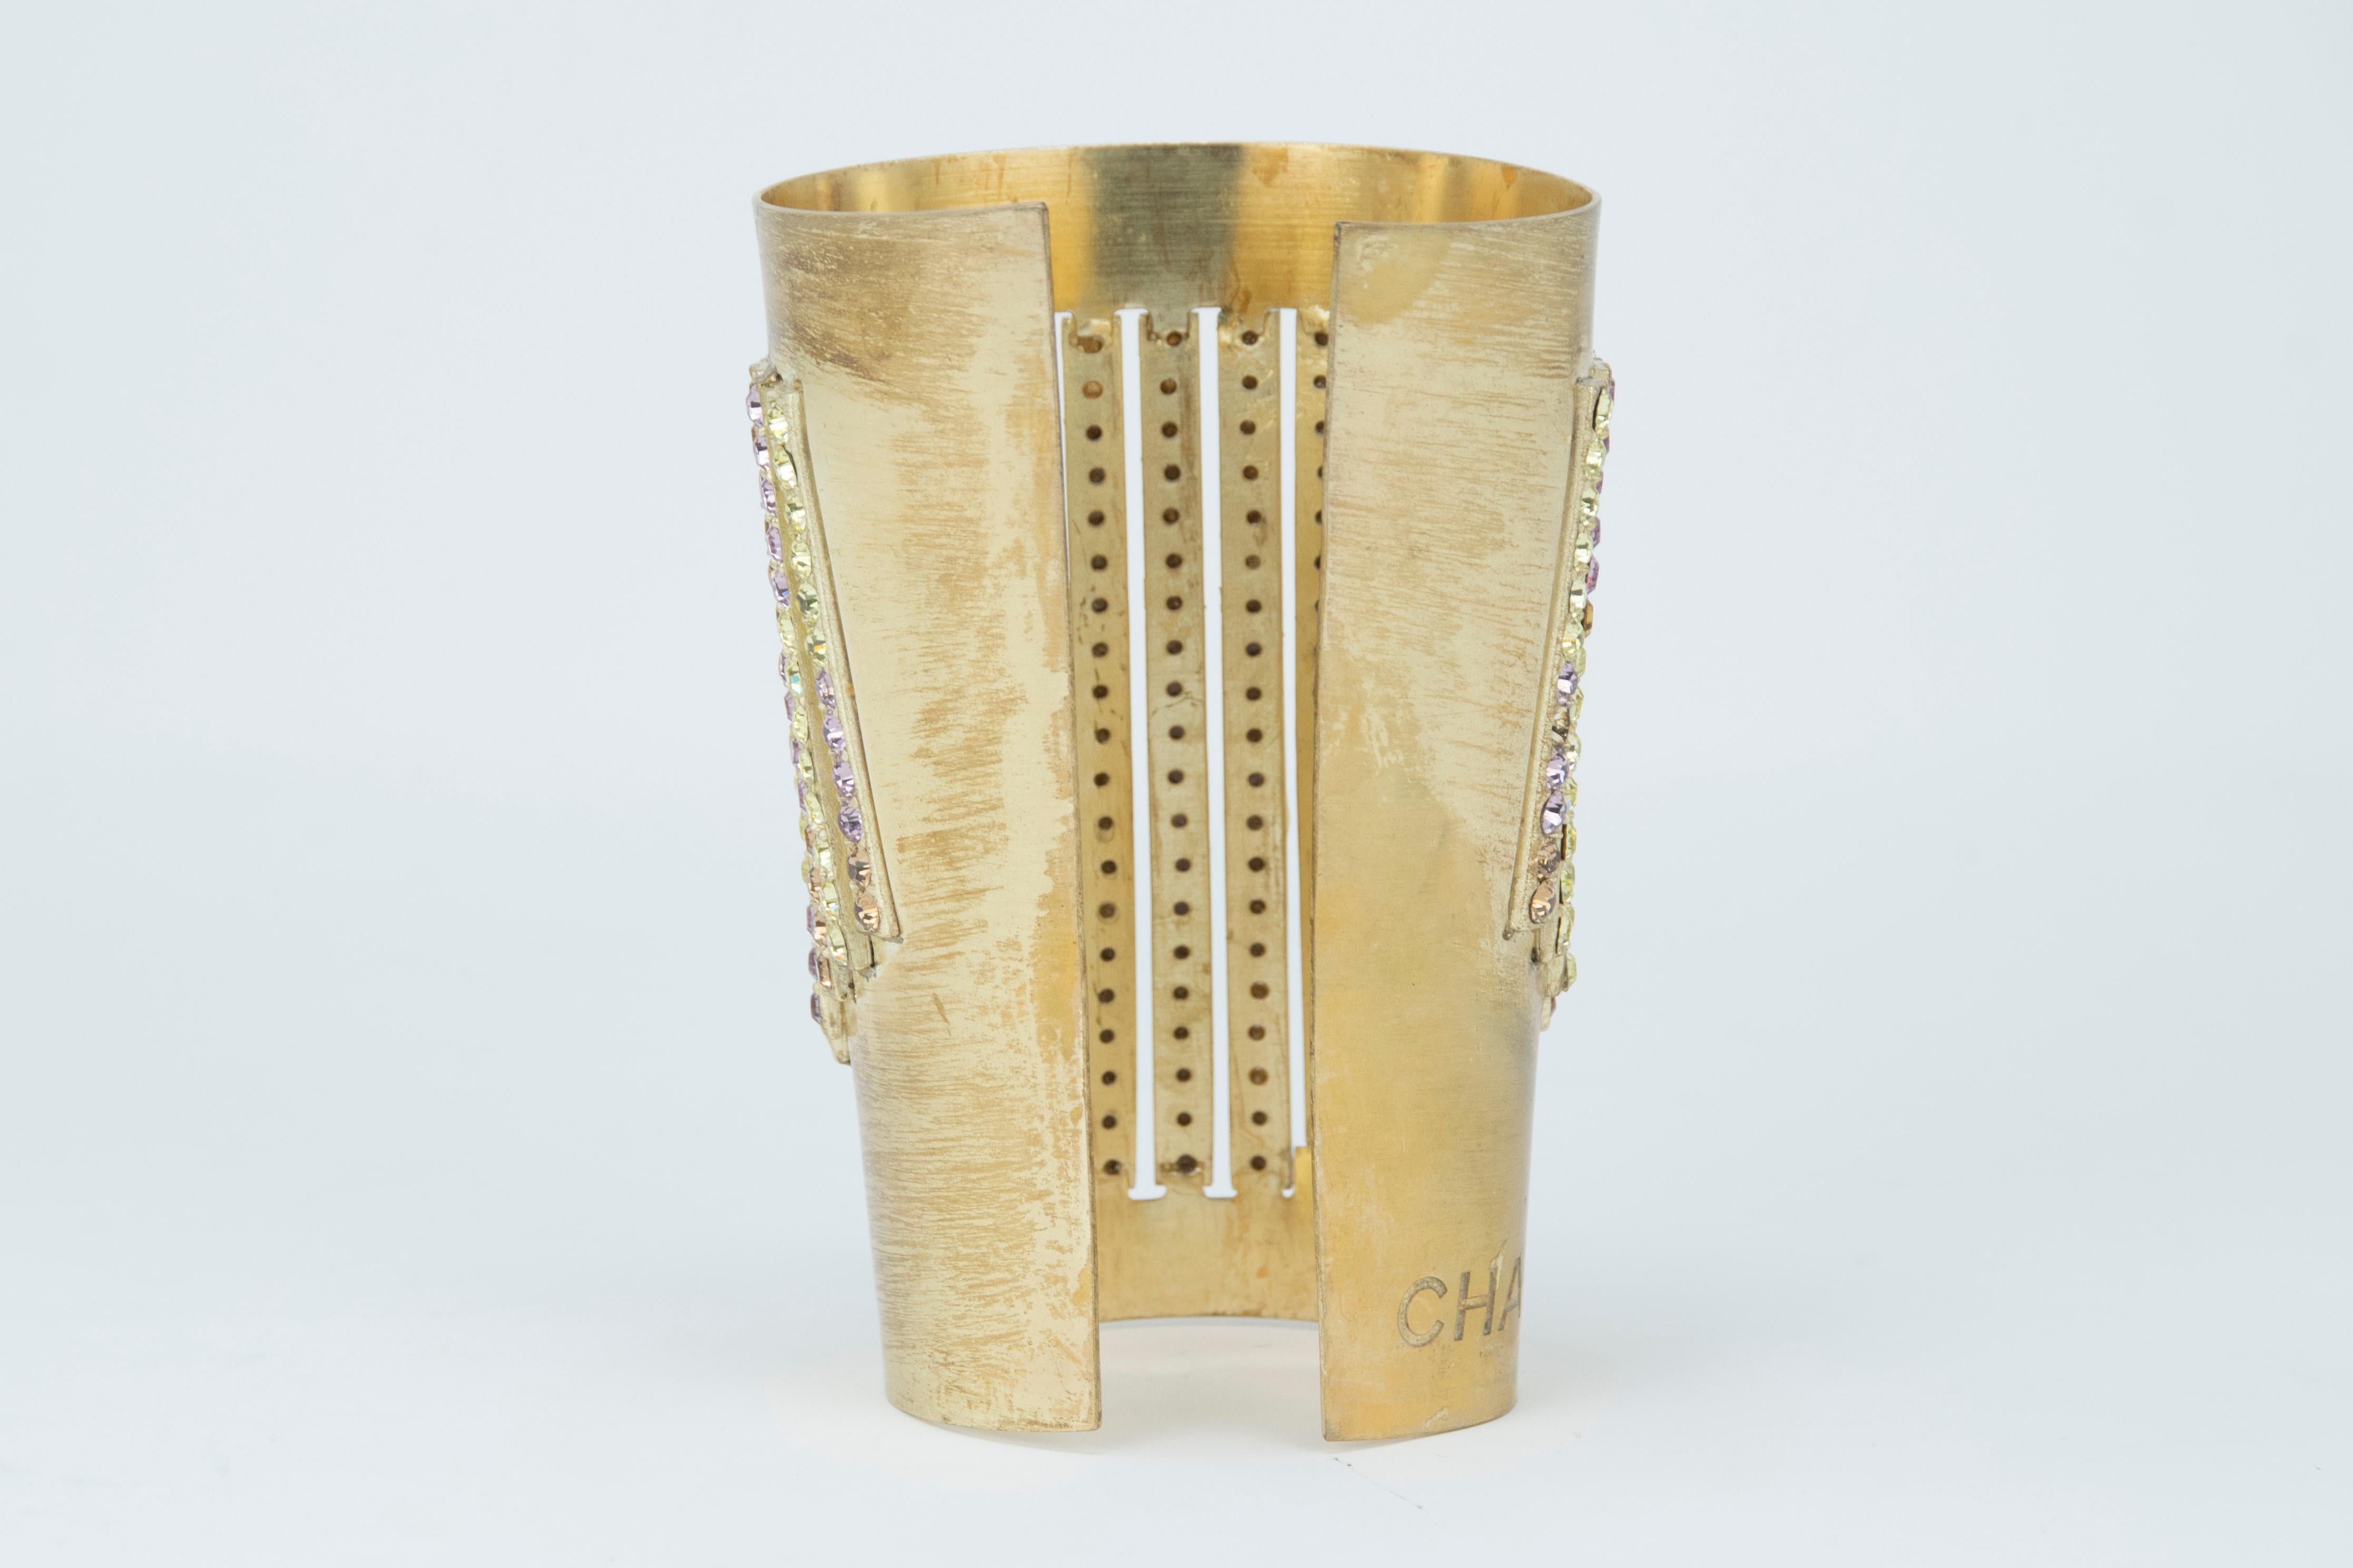 This Chanel cuff makes for an incredible statement piece.  Gold with rows of consecutive multicolored rhinestones.  Chanel engraved into the side of the gold.  Perfect for a more dressed up look or to pair with a button down and jeans.

Condition: